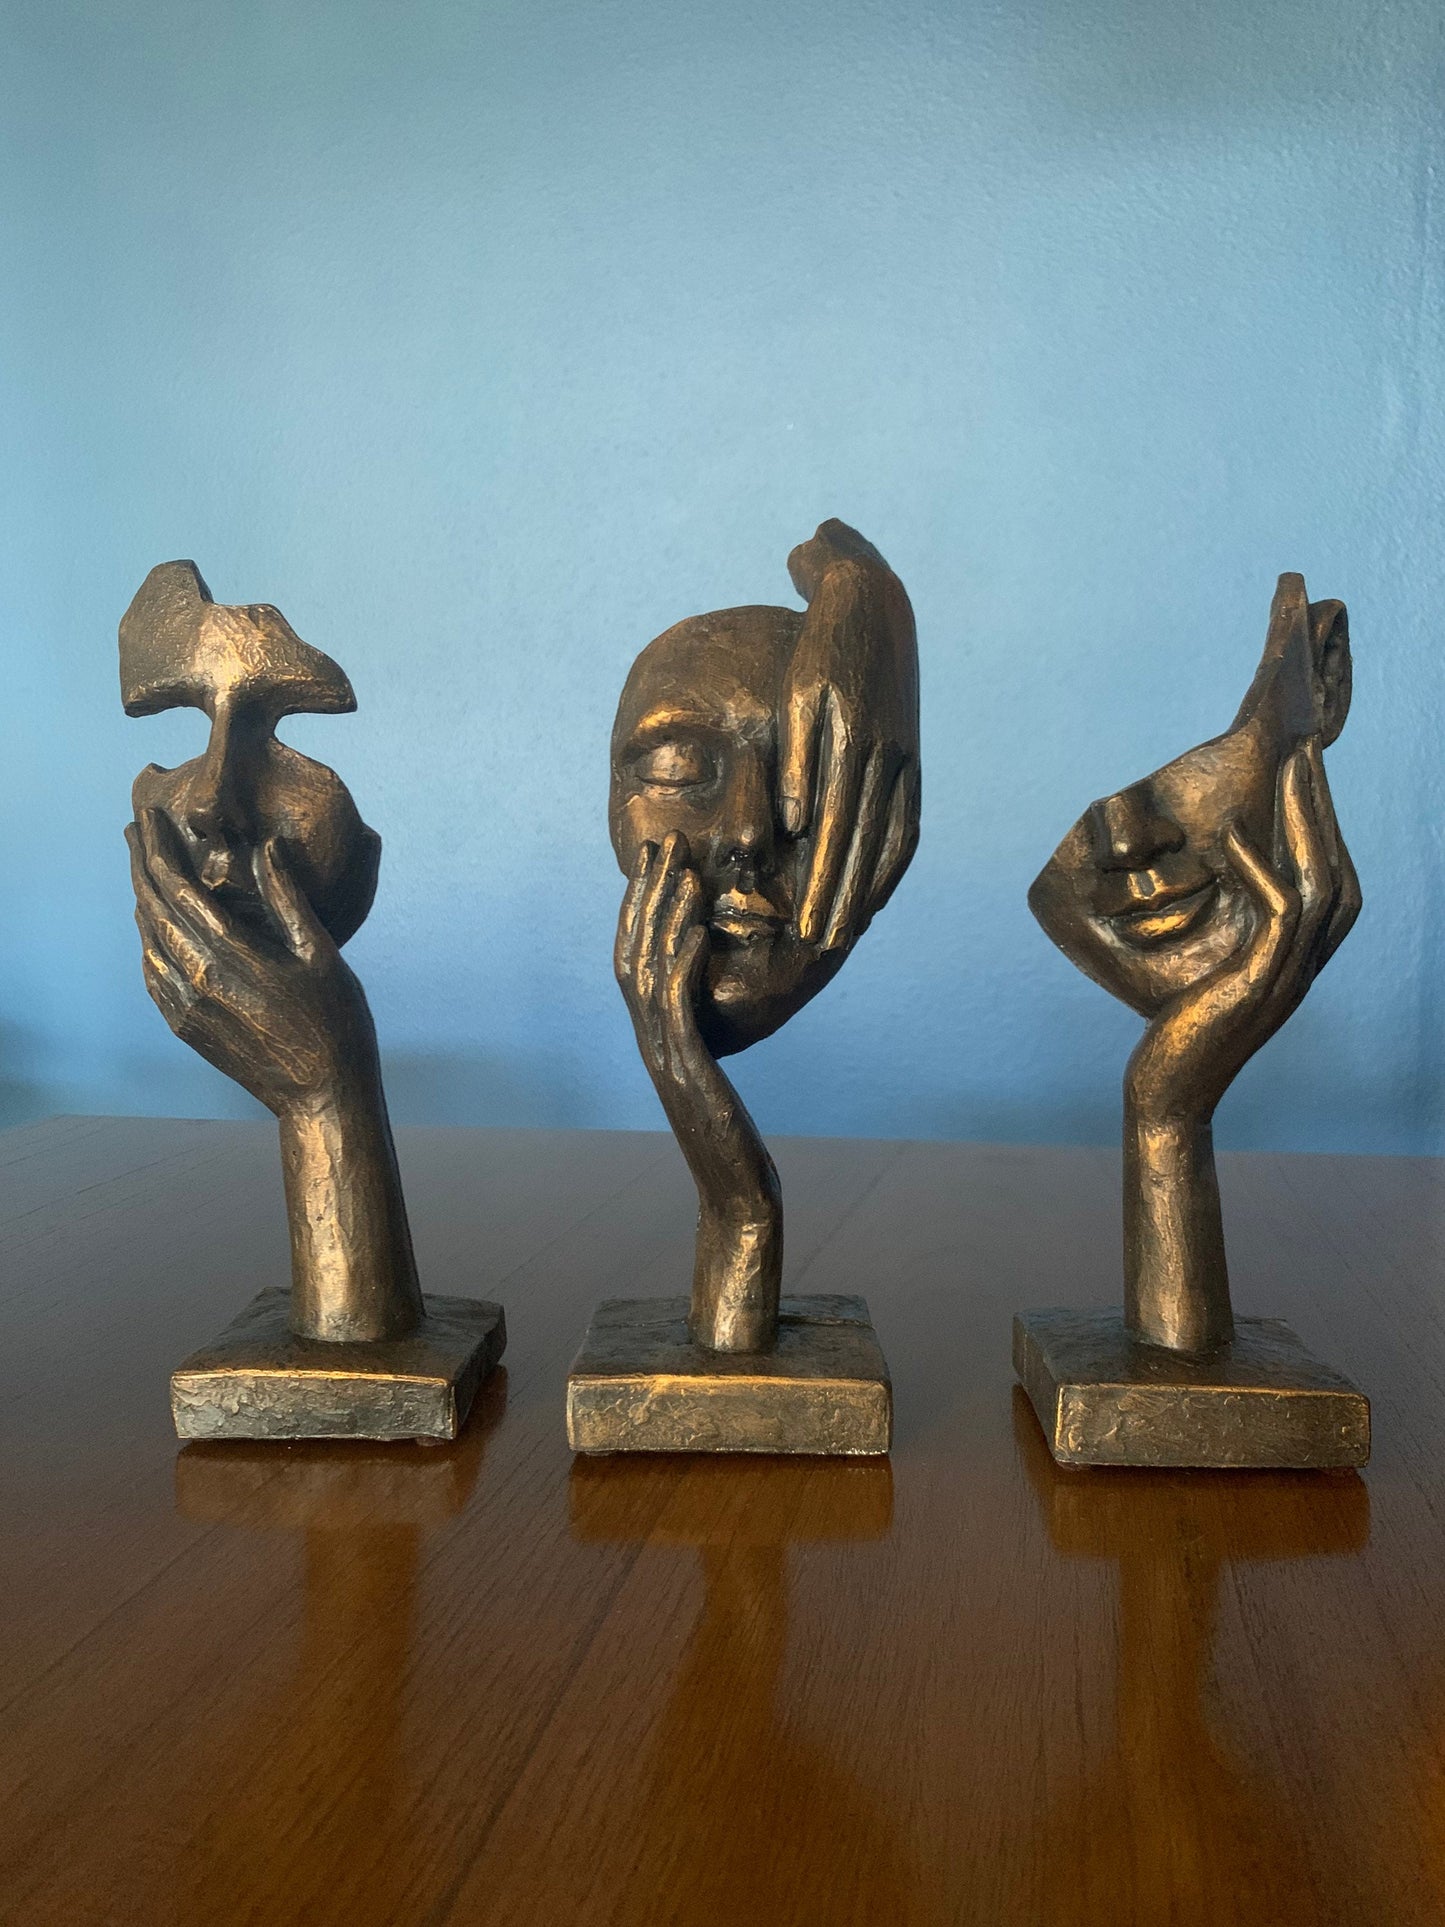 Creative Abstract Decor, Statue Face, Hand Statues, Sculptures Home Office Desk Figurine, Set of 3, Set of 2 Mother's Day Gift